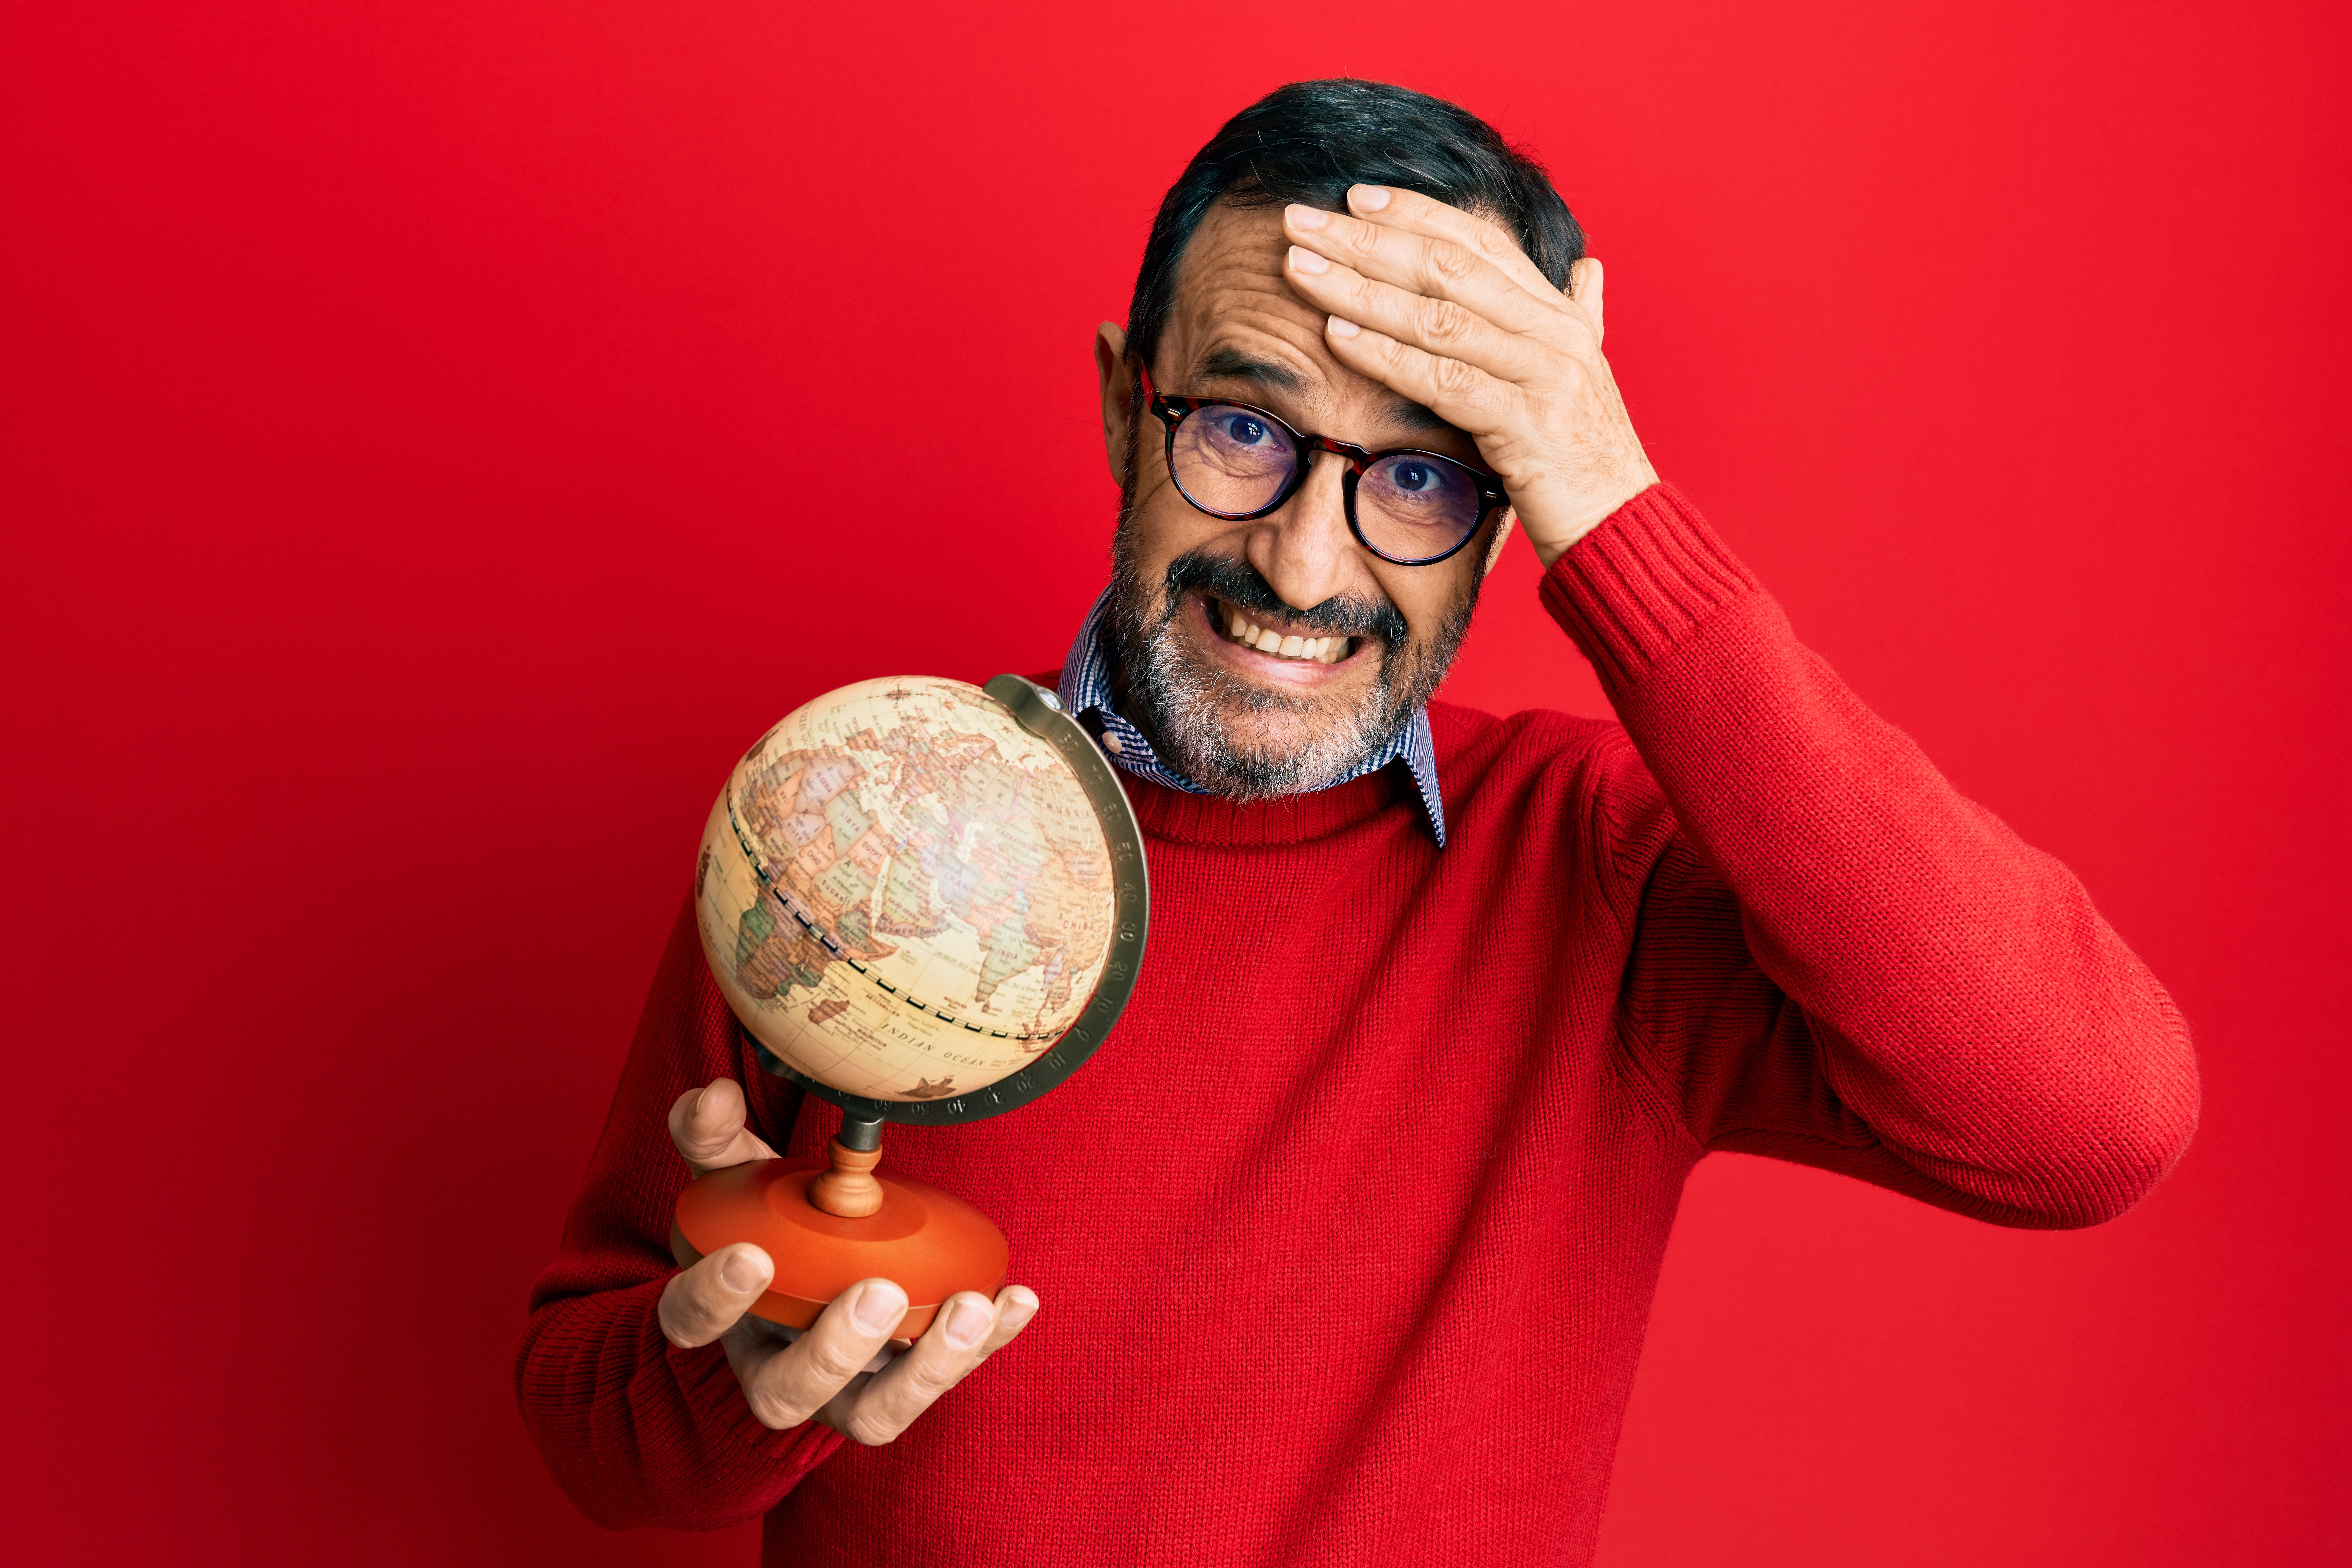 man holding a globe looking confused over geography quiz questions